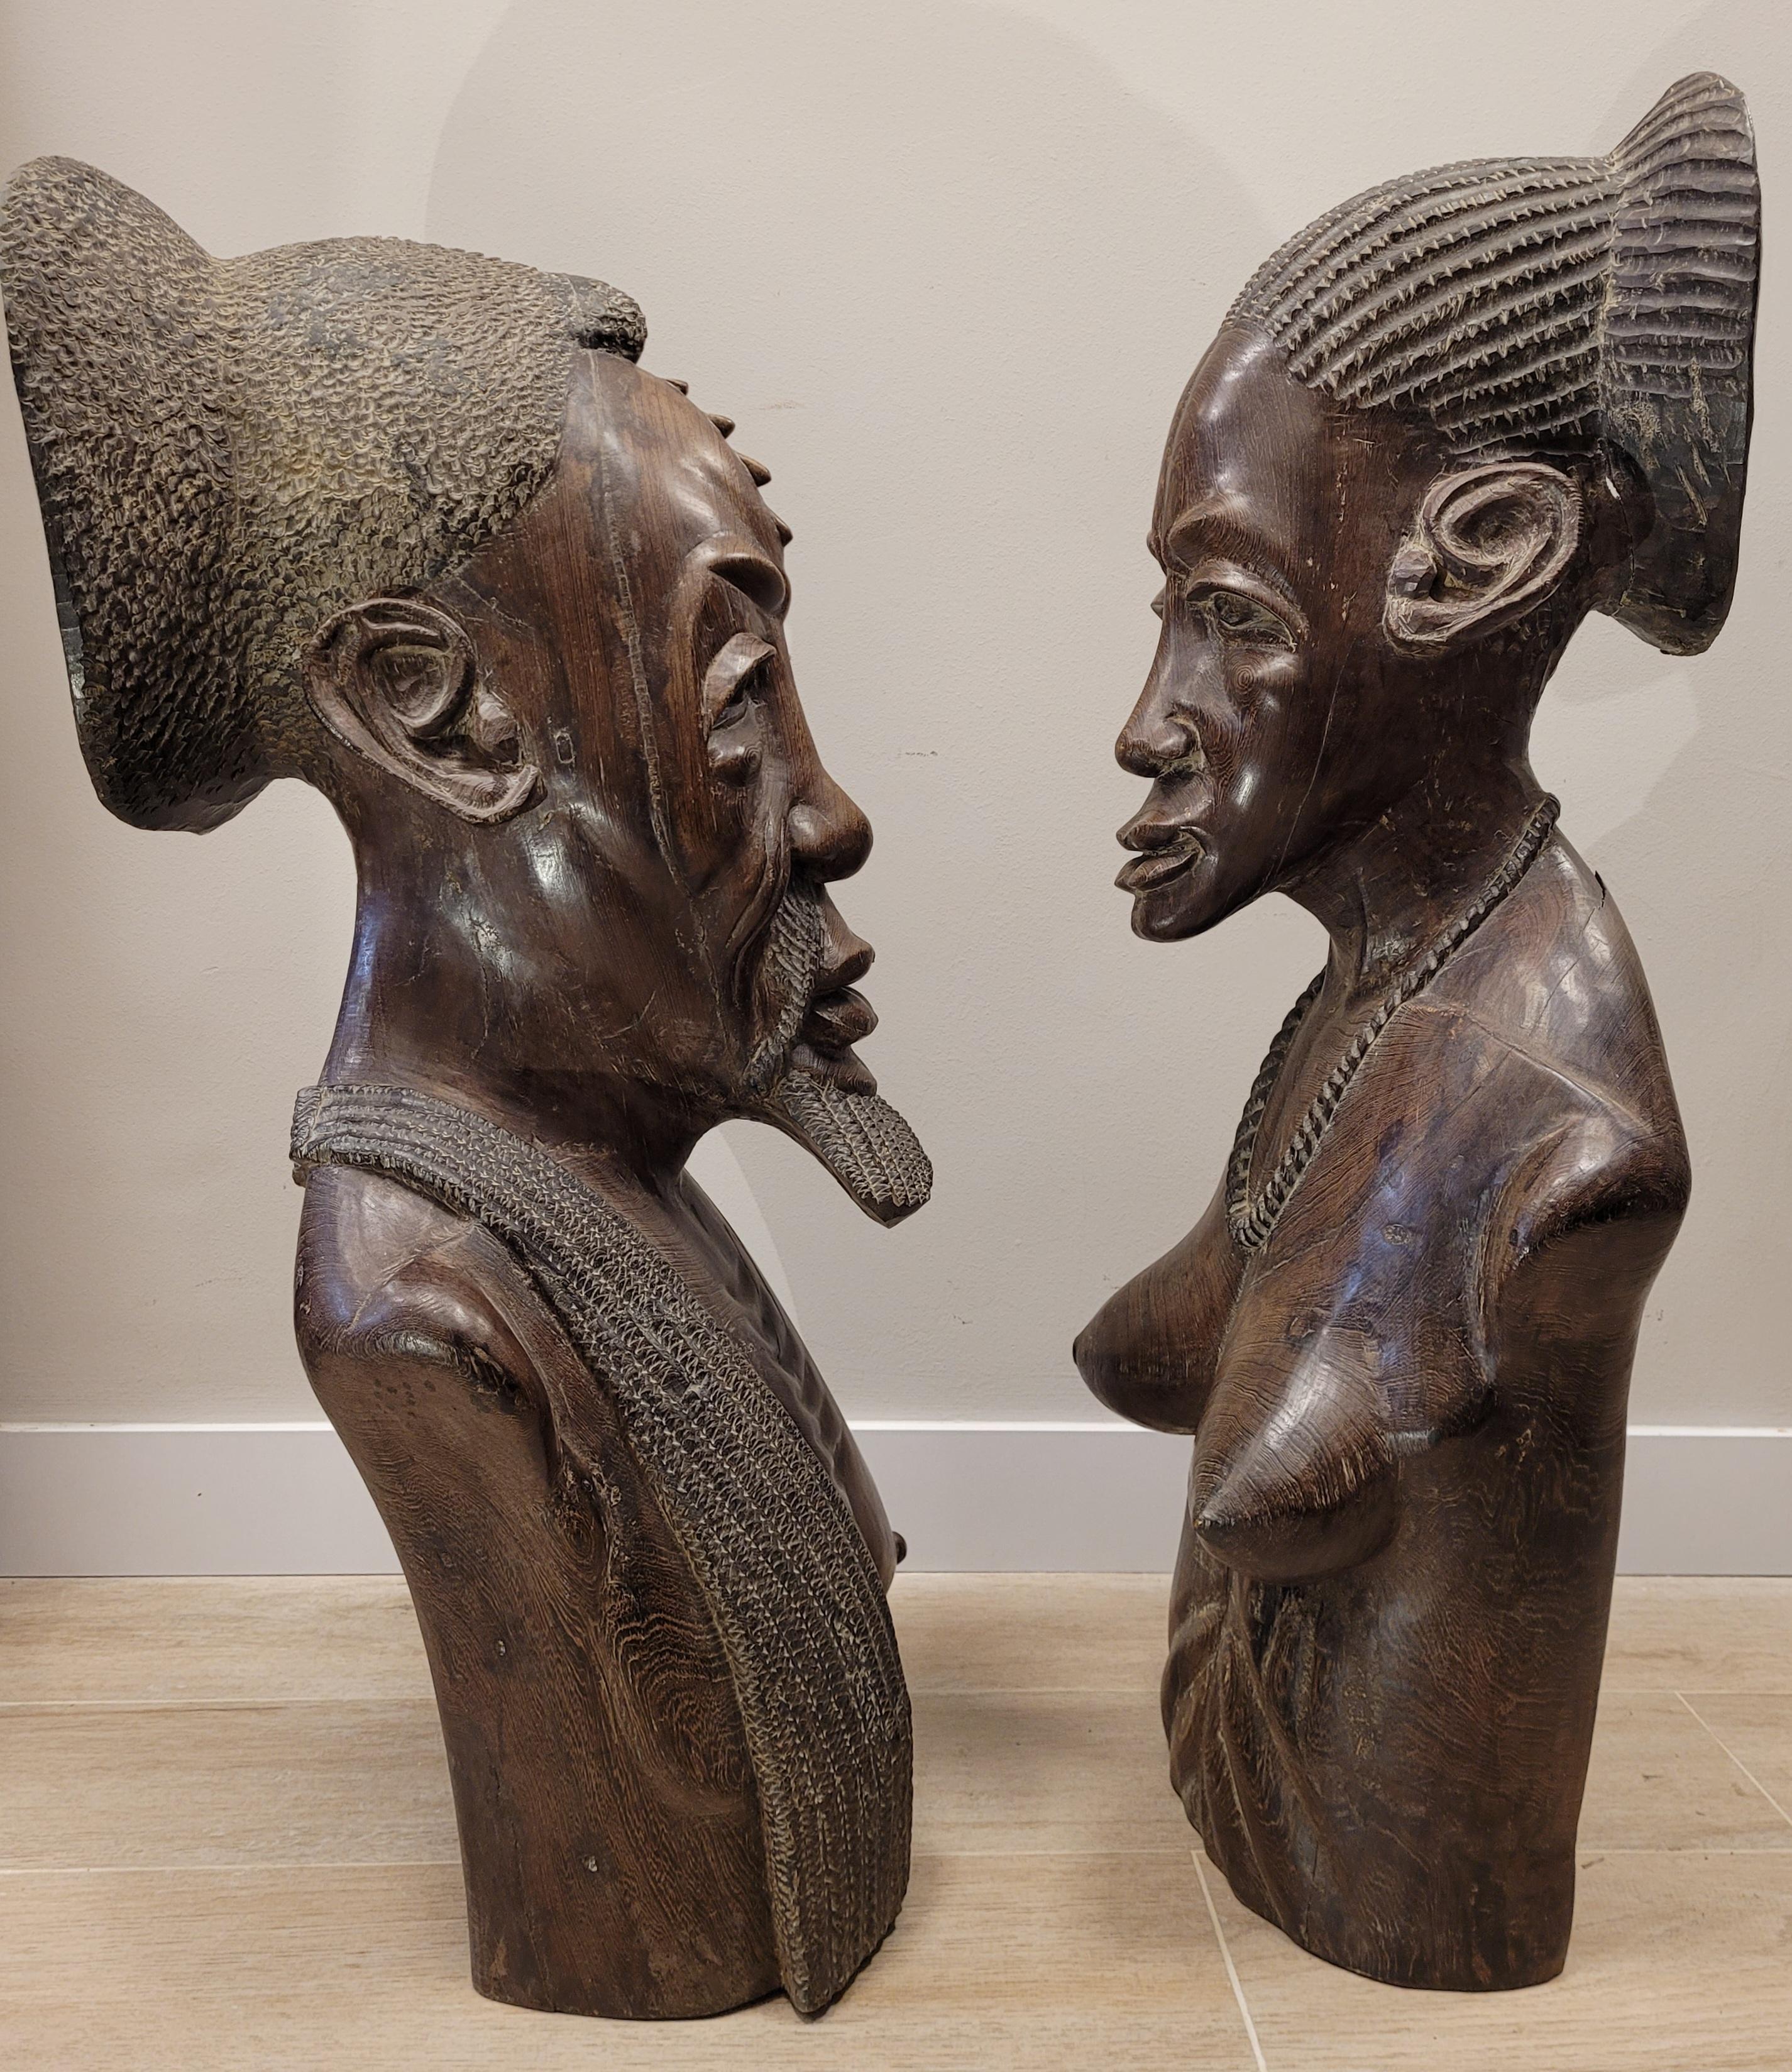 French Wood Sculptures, Couple of Busts, Sculptures of Africans from the Congo 11